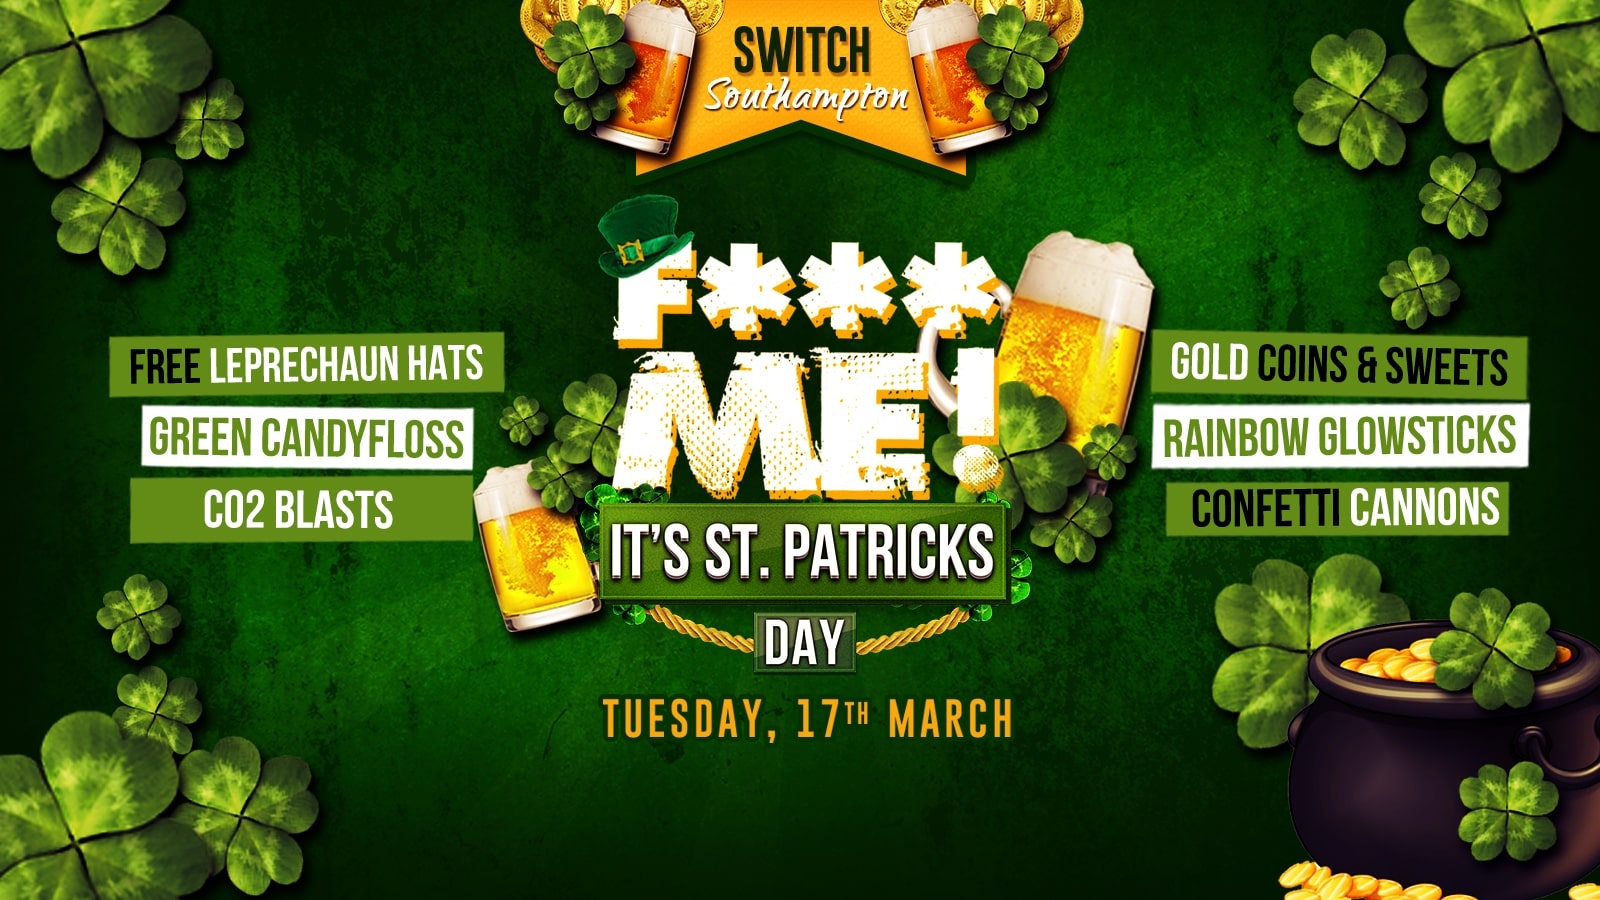 F*CK ME It’s St Patrick’s Day! – End of Term Party! – Tickets from £1